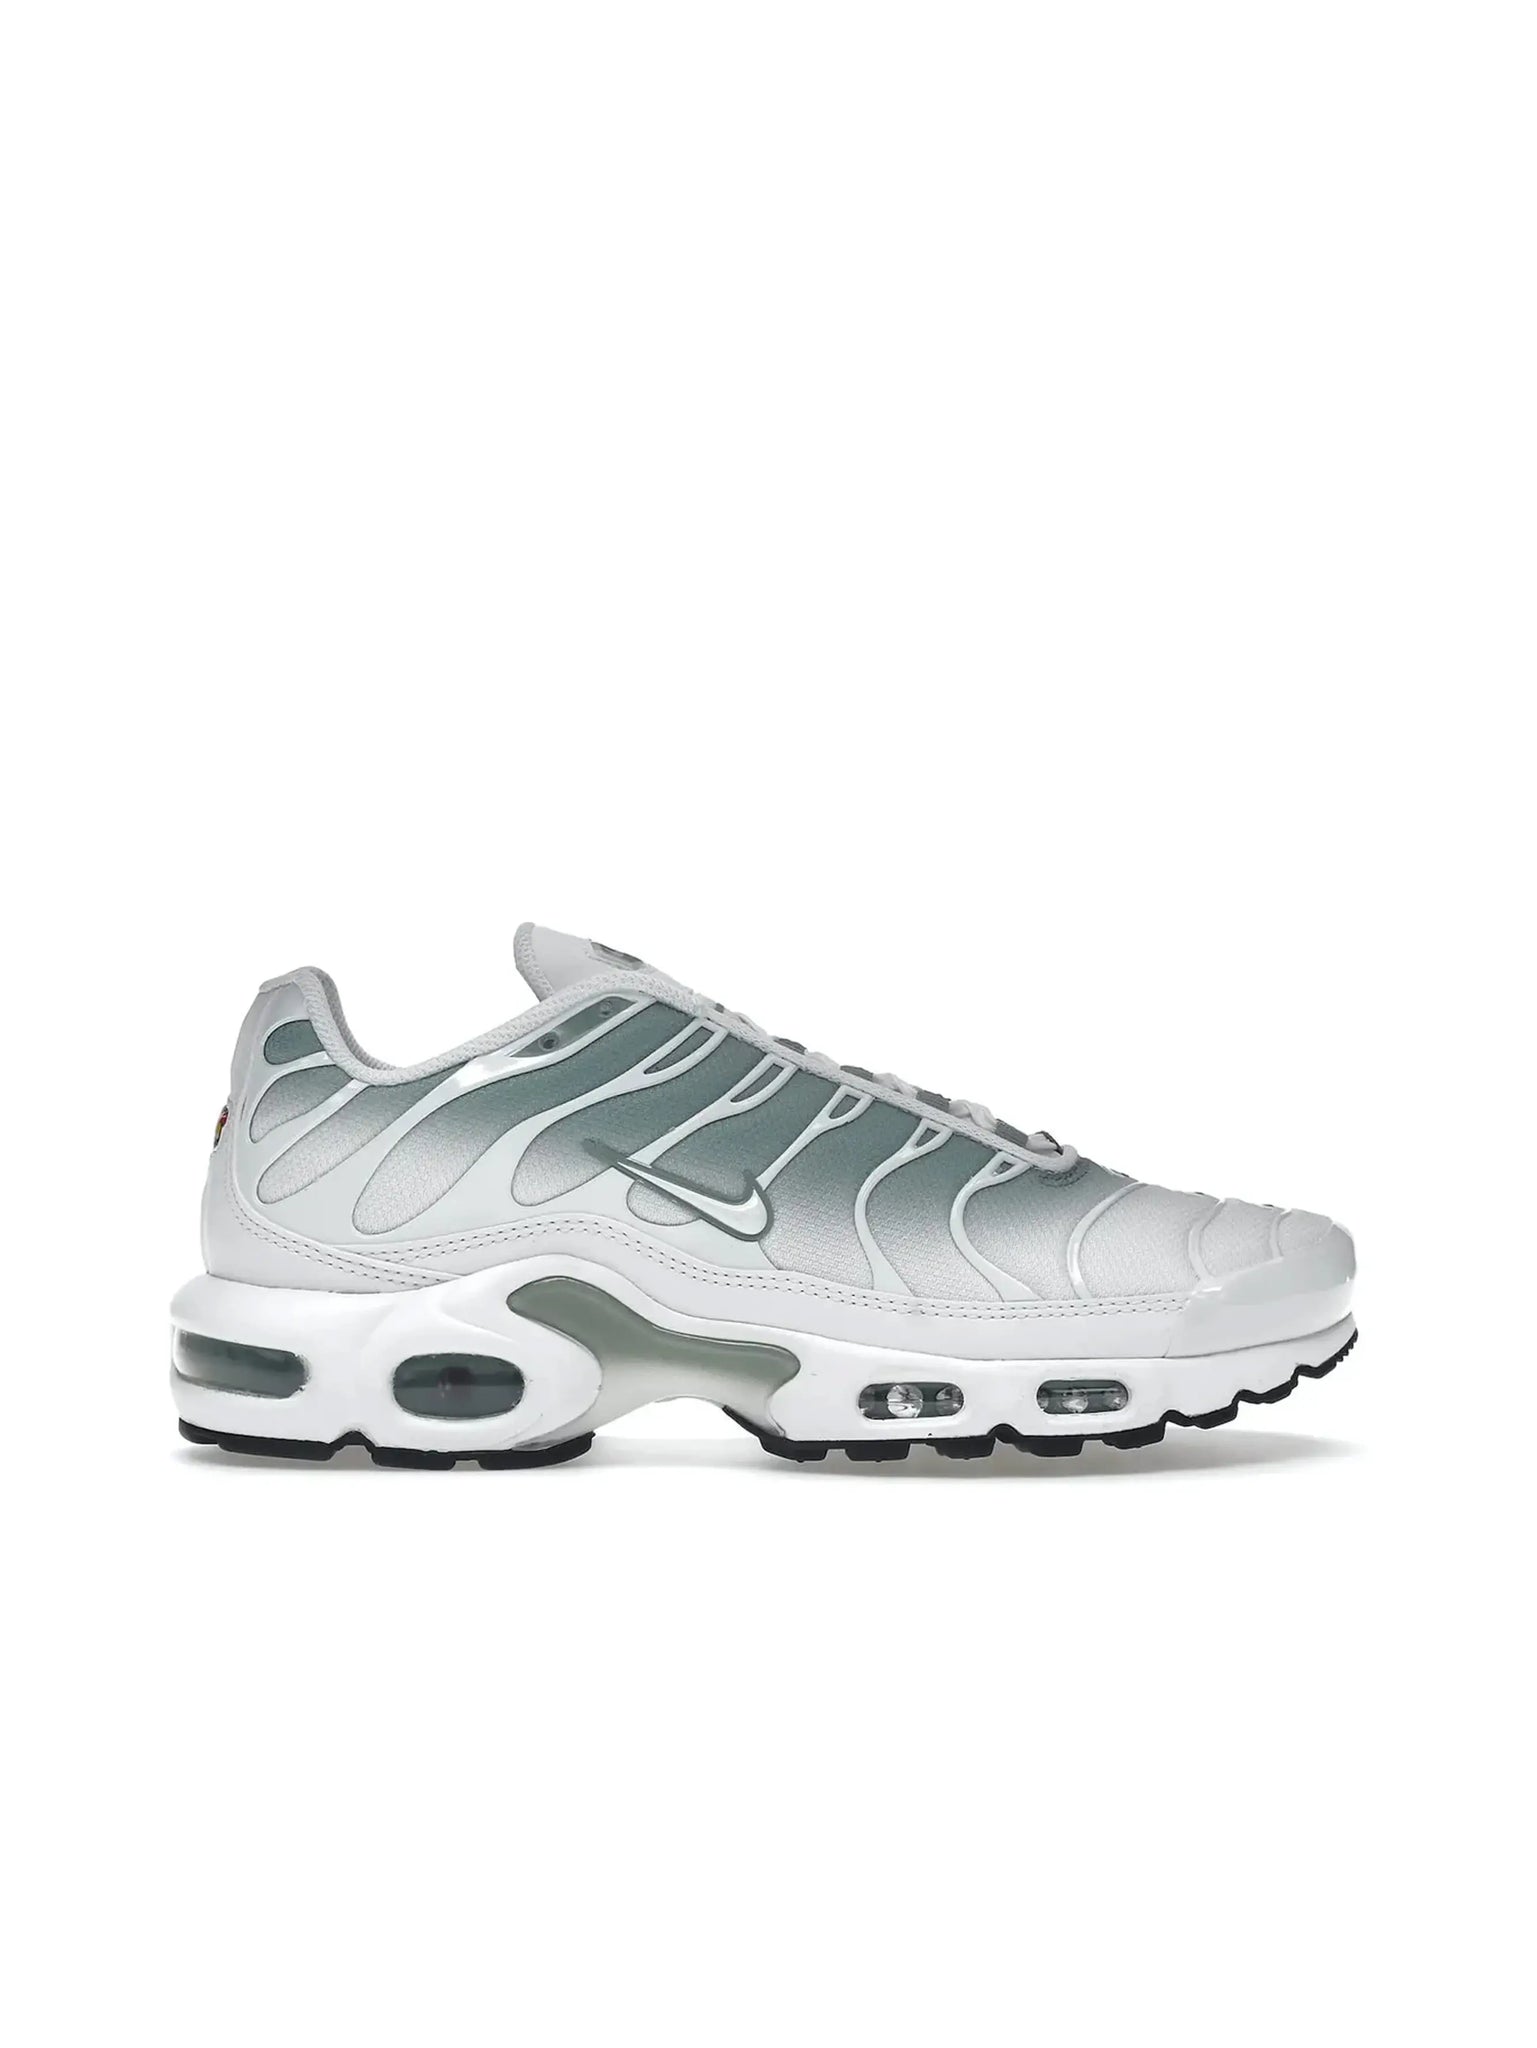 Nike Air Max Plus White Mica Green (Women's) in Auckland, New Zealand - Shop name